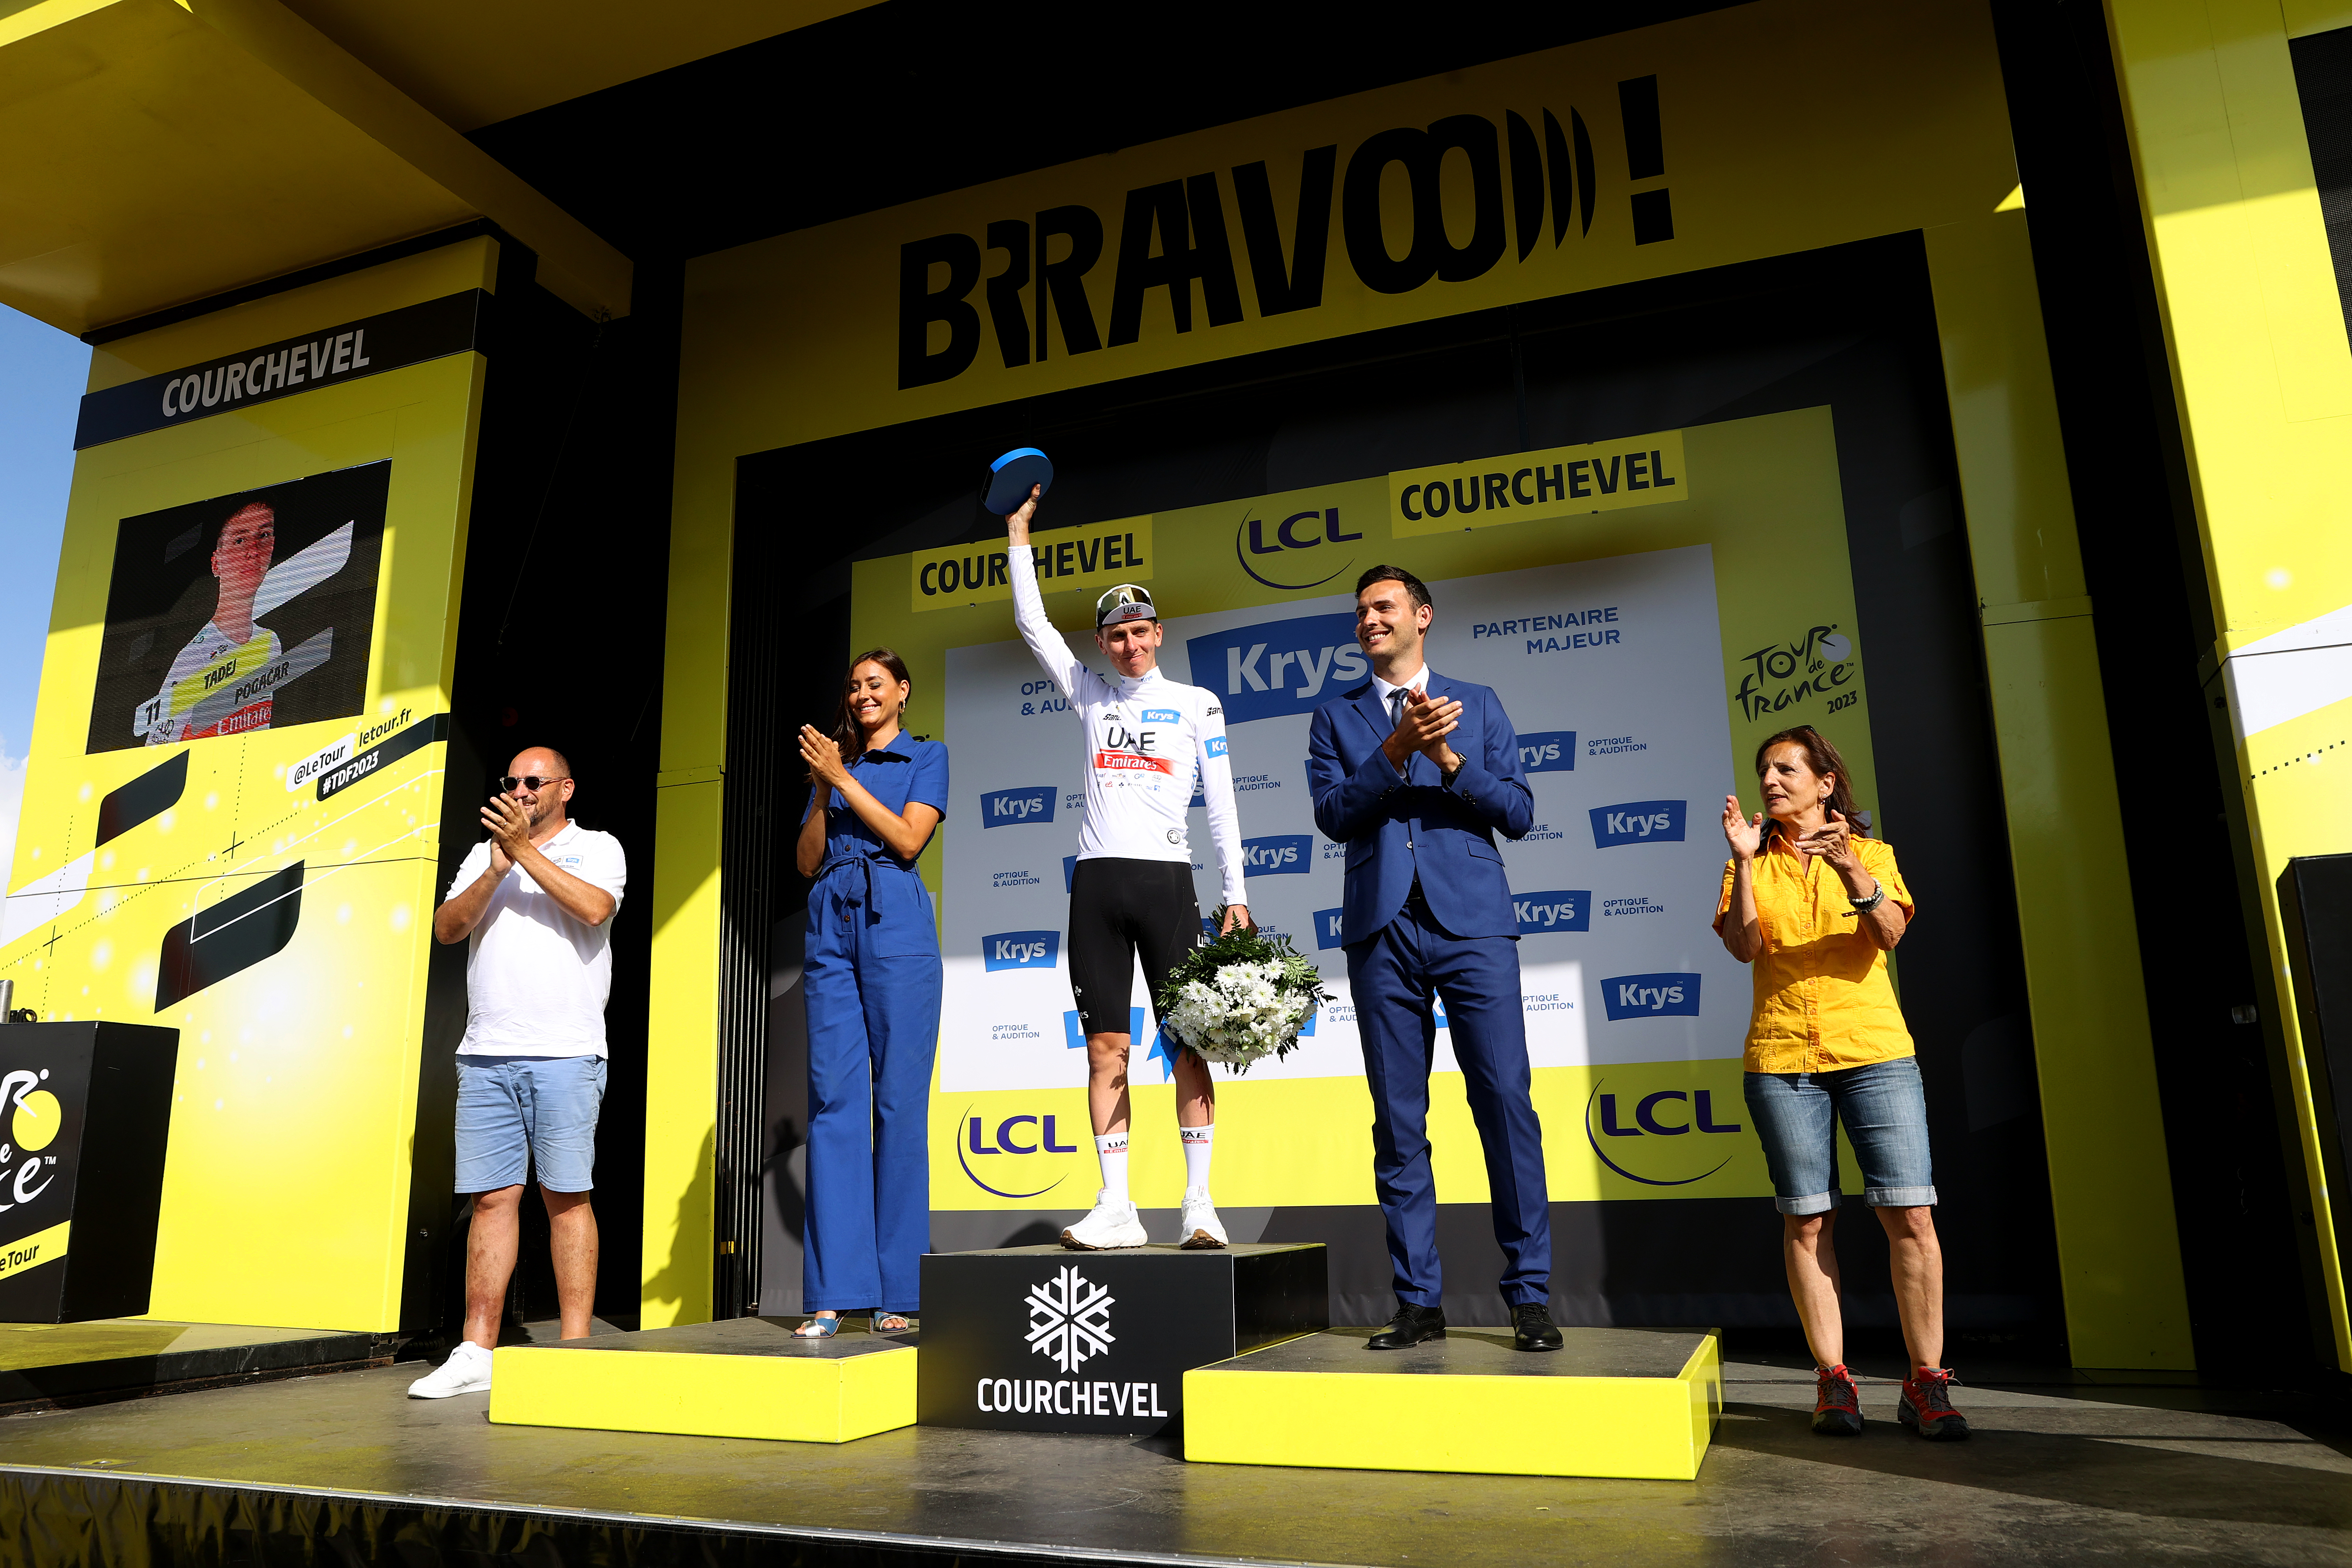 Tadej Pogacar of Slovenia and UAE Team Emirates - White Best Young Rider Jersey celebrates at podium during the stage seventeen of the 110th Tour de France 2023 a 165.7km at stage from Saint-Gervais Mont-Blanc to Courchevel / #UCIWT / on July 19, 2023 in Courchevel, France.